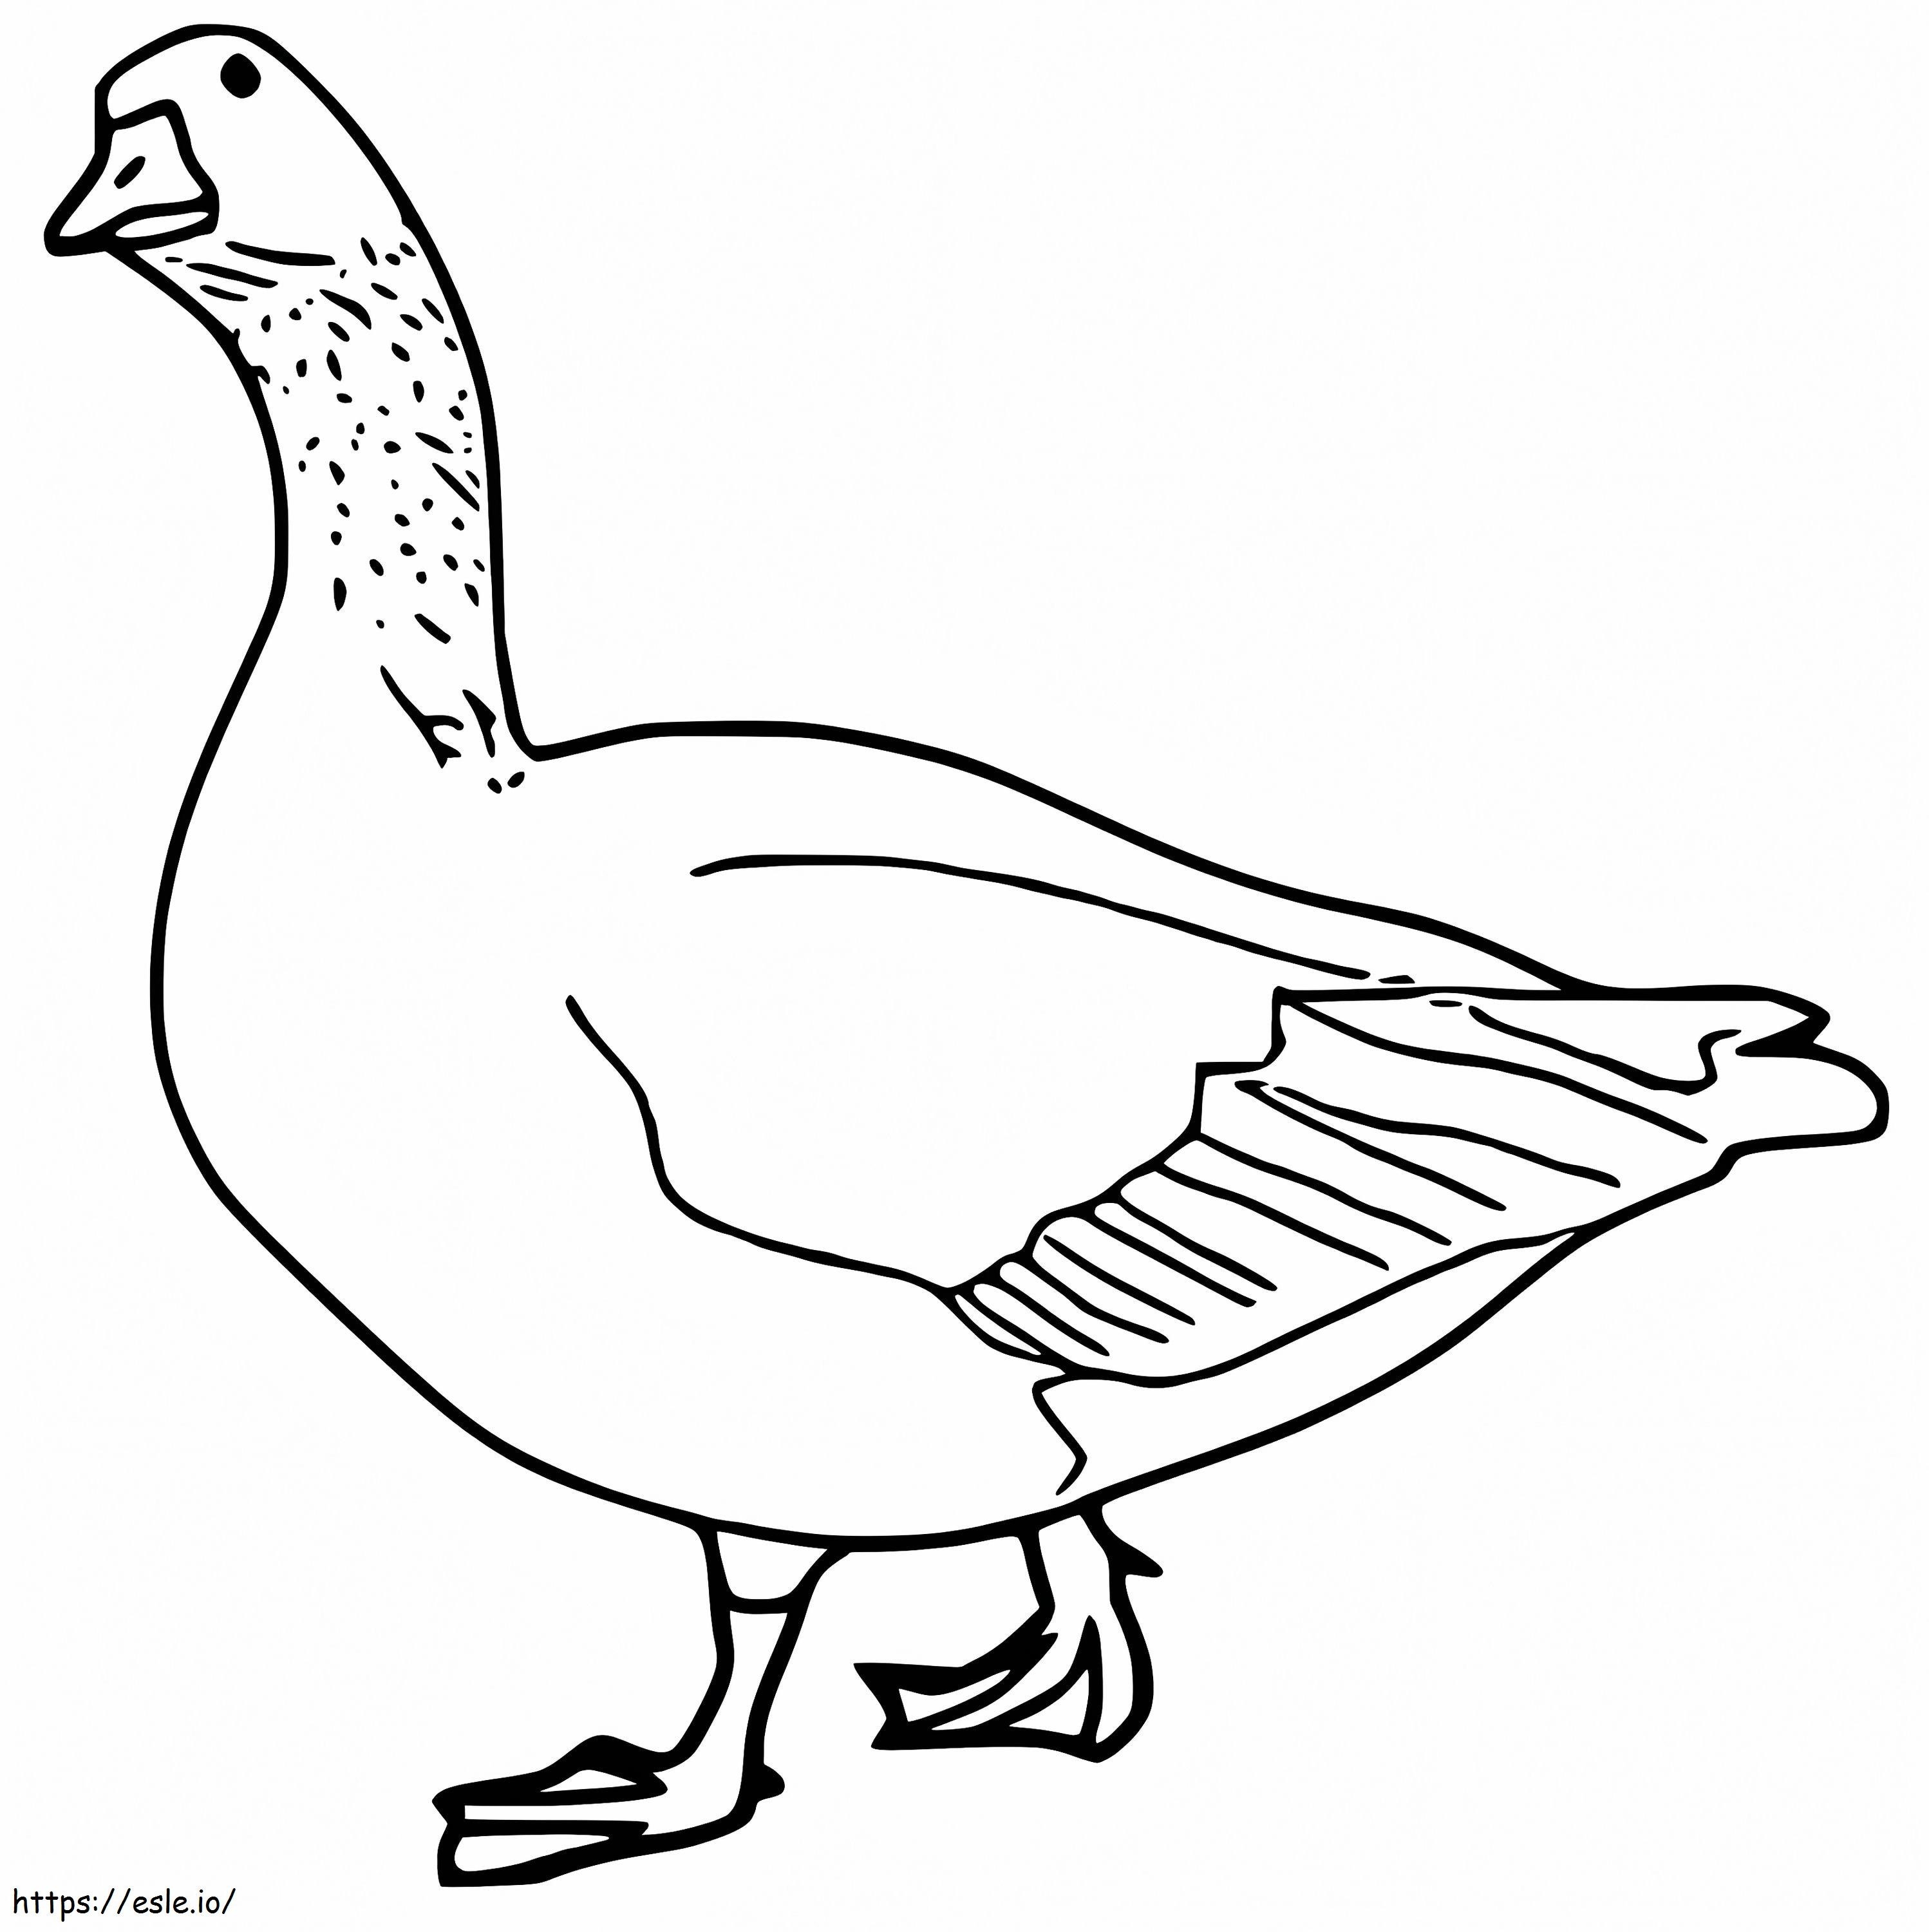 Common Goose coloring page